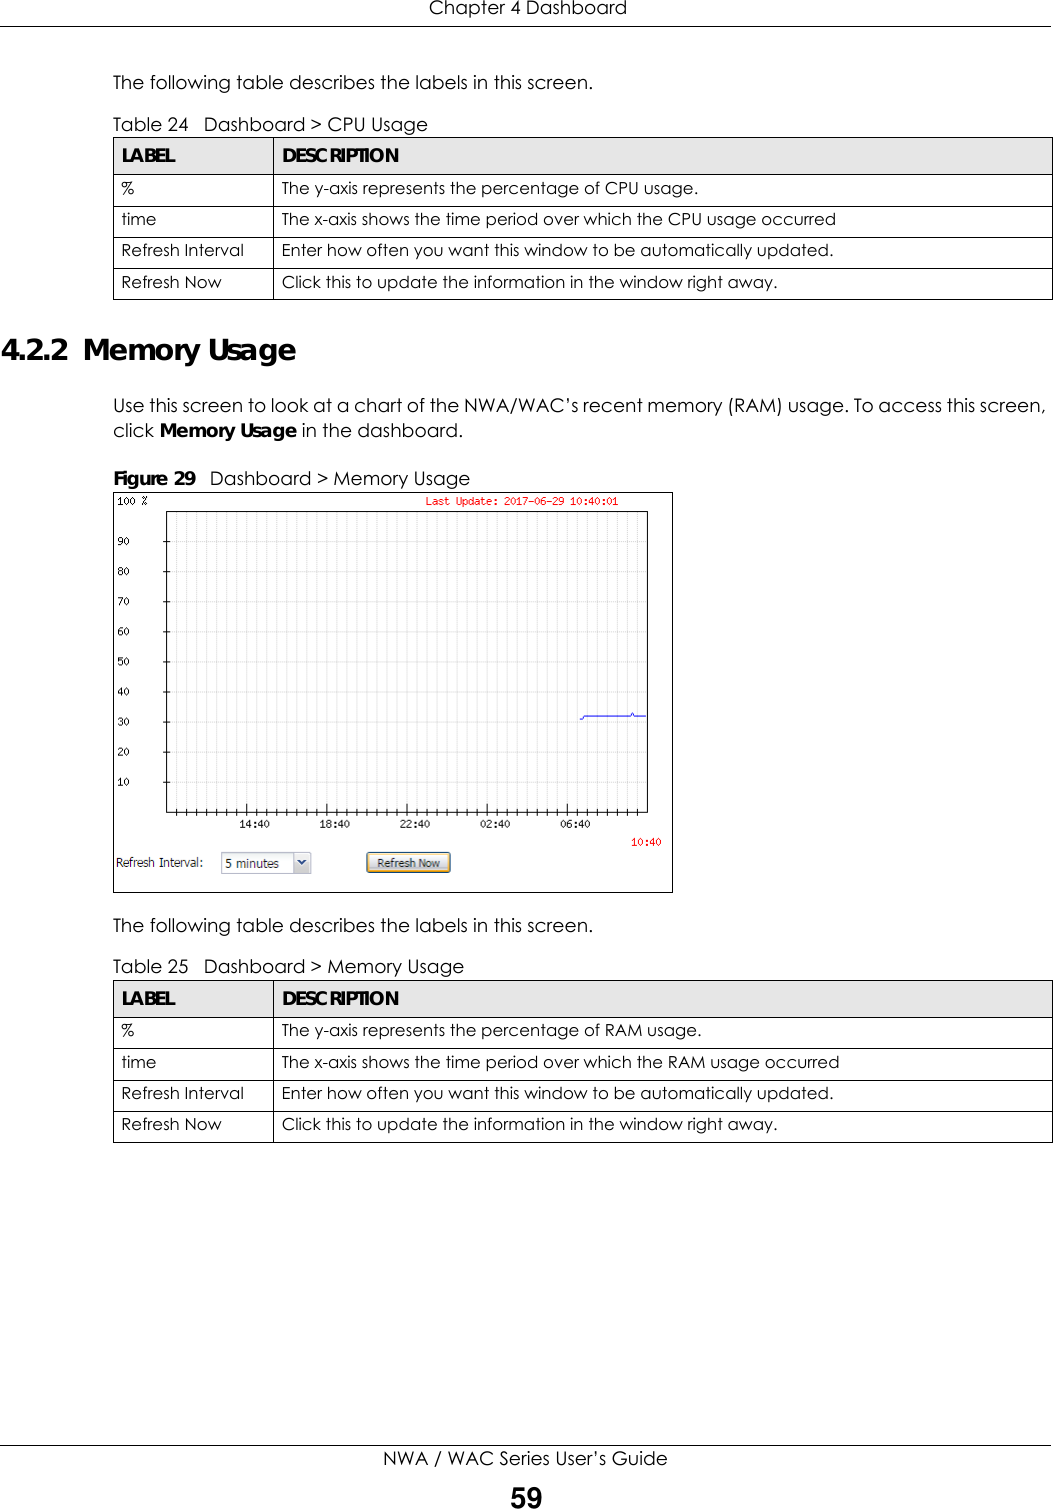  Chapter 4 DashboardNWA / WAC Series User’s Guide59The following table describes the labels in this screen.  4.2.2  Memory UsageUse this screen to look at a chart of the NWA/WAC’s recent memory (RAM) usage. To access this screen, click Memory Usage in the dashboard.Figure 29   Dashboard &gt; Memory UsageThe following table describes the labels in this screen.  Table 24   Dashboard &gt; CPU UsageLABEL DESCRIPTION% The y-axis represents the percentage of CPU usage.time The x-axis shows the time period over which the CPU usage occurredRefresh Interval Enter how often you want this window to be automatically updated.Refresh Now Click this to update the information in the window right away. Table 25   Dashboard &gt; Memory UsageLABEL DESCRIPTION% The y-axis represents the percentage of RAM usage.time The x-axis shows the time period over which the RAM usage occurredRefresh Interval Enter how often you want this window to be automatically updated.Refresh Now Click this to update the information in the window right away. 